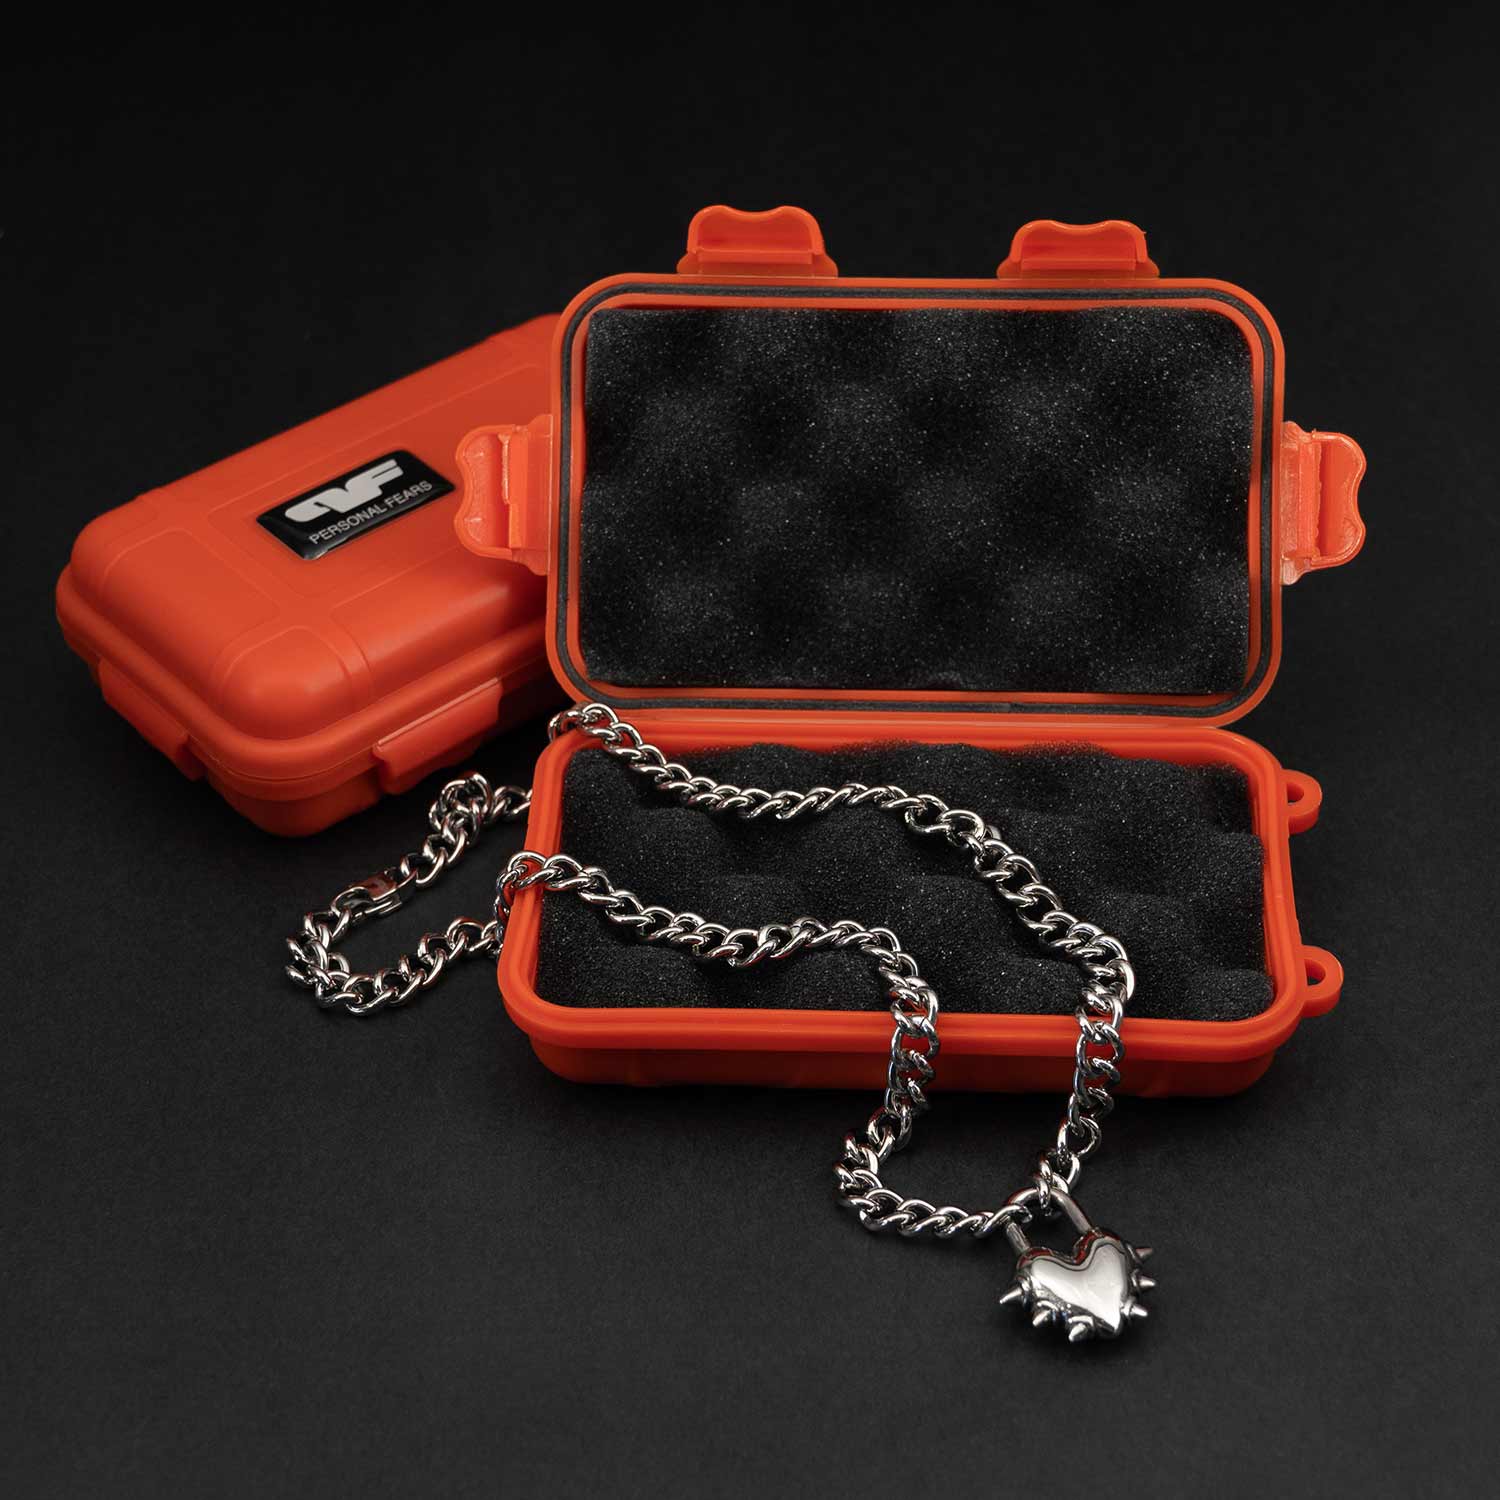 Personal Fears Vicious Heart Chain With Custom Waterproof Stash Case